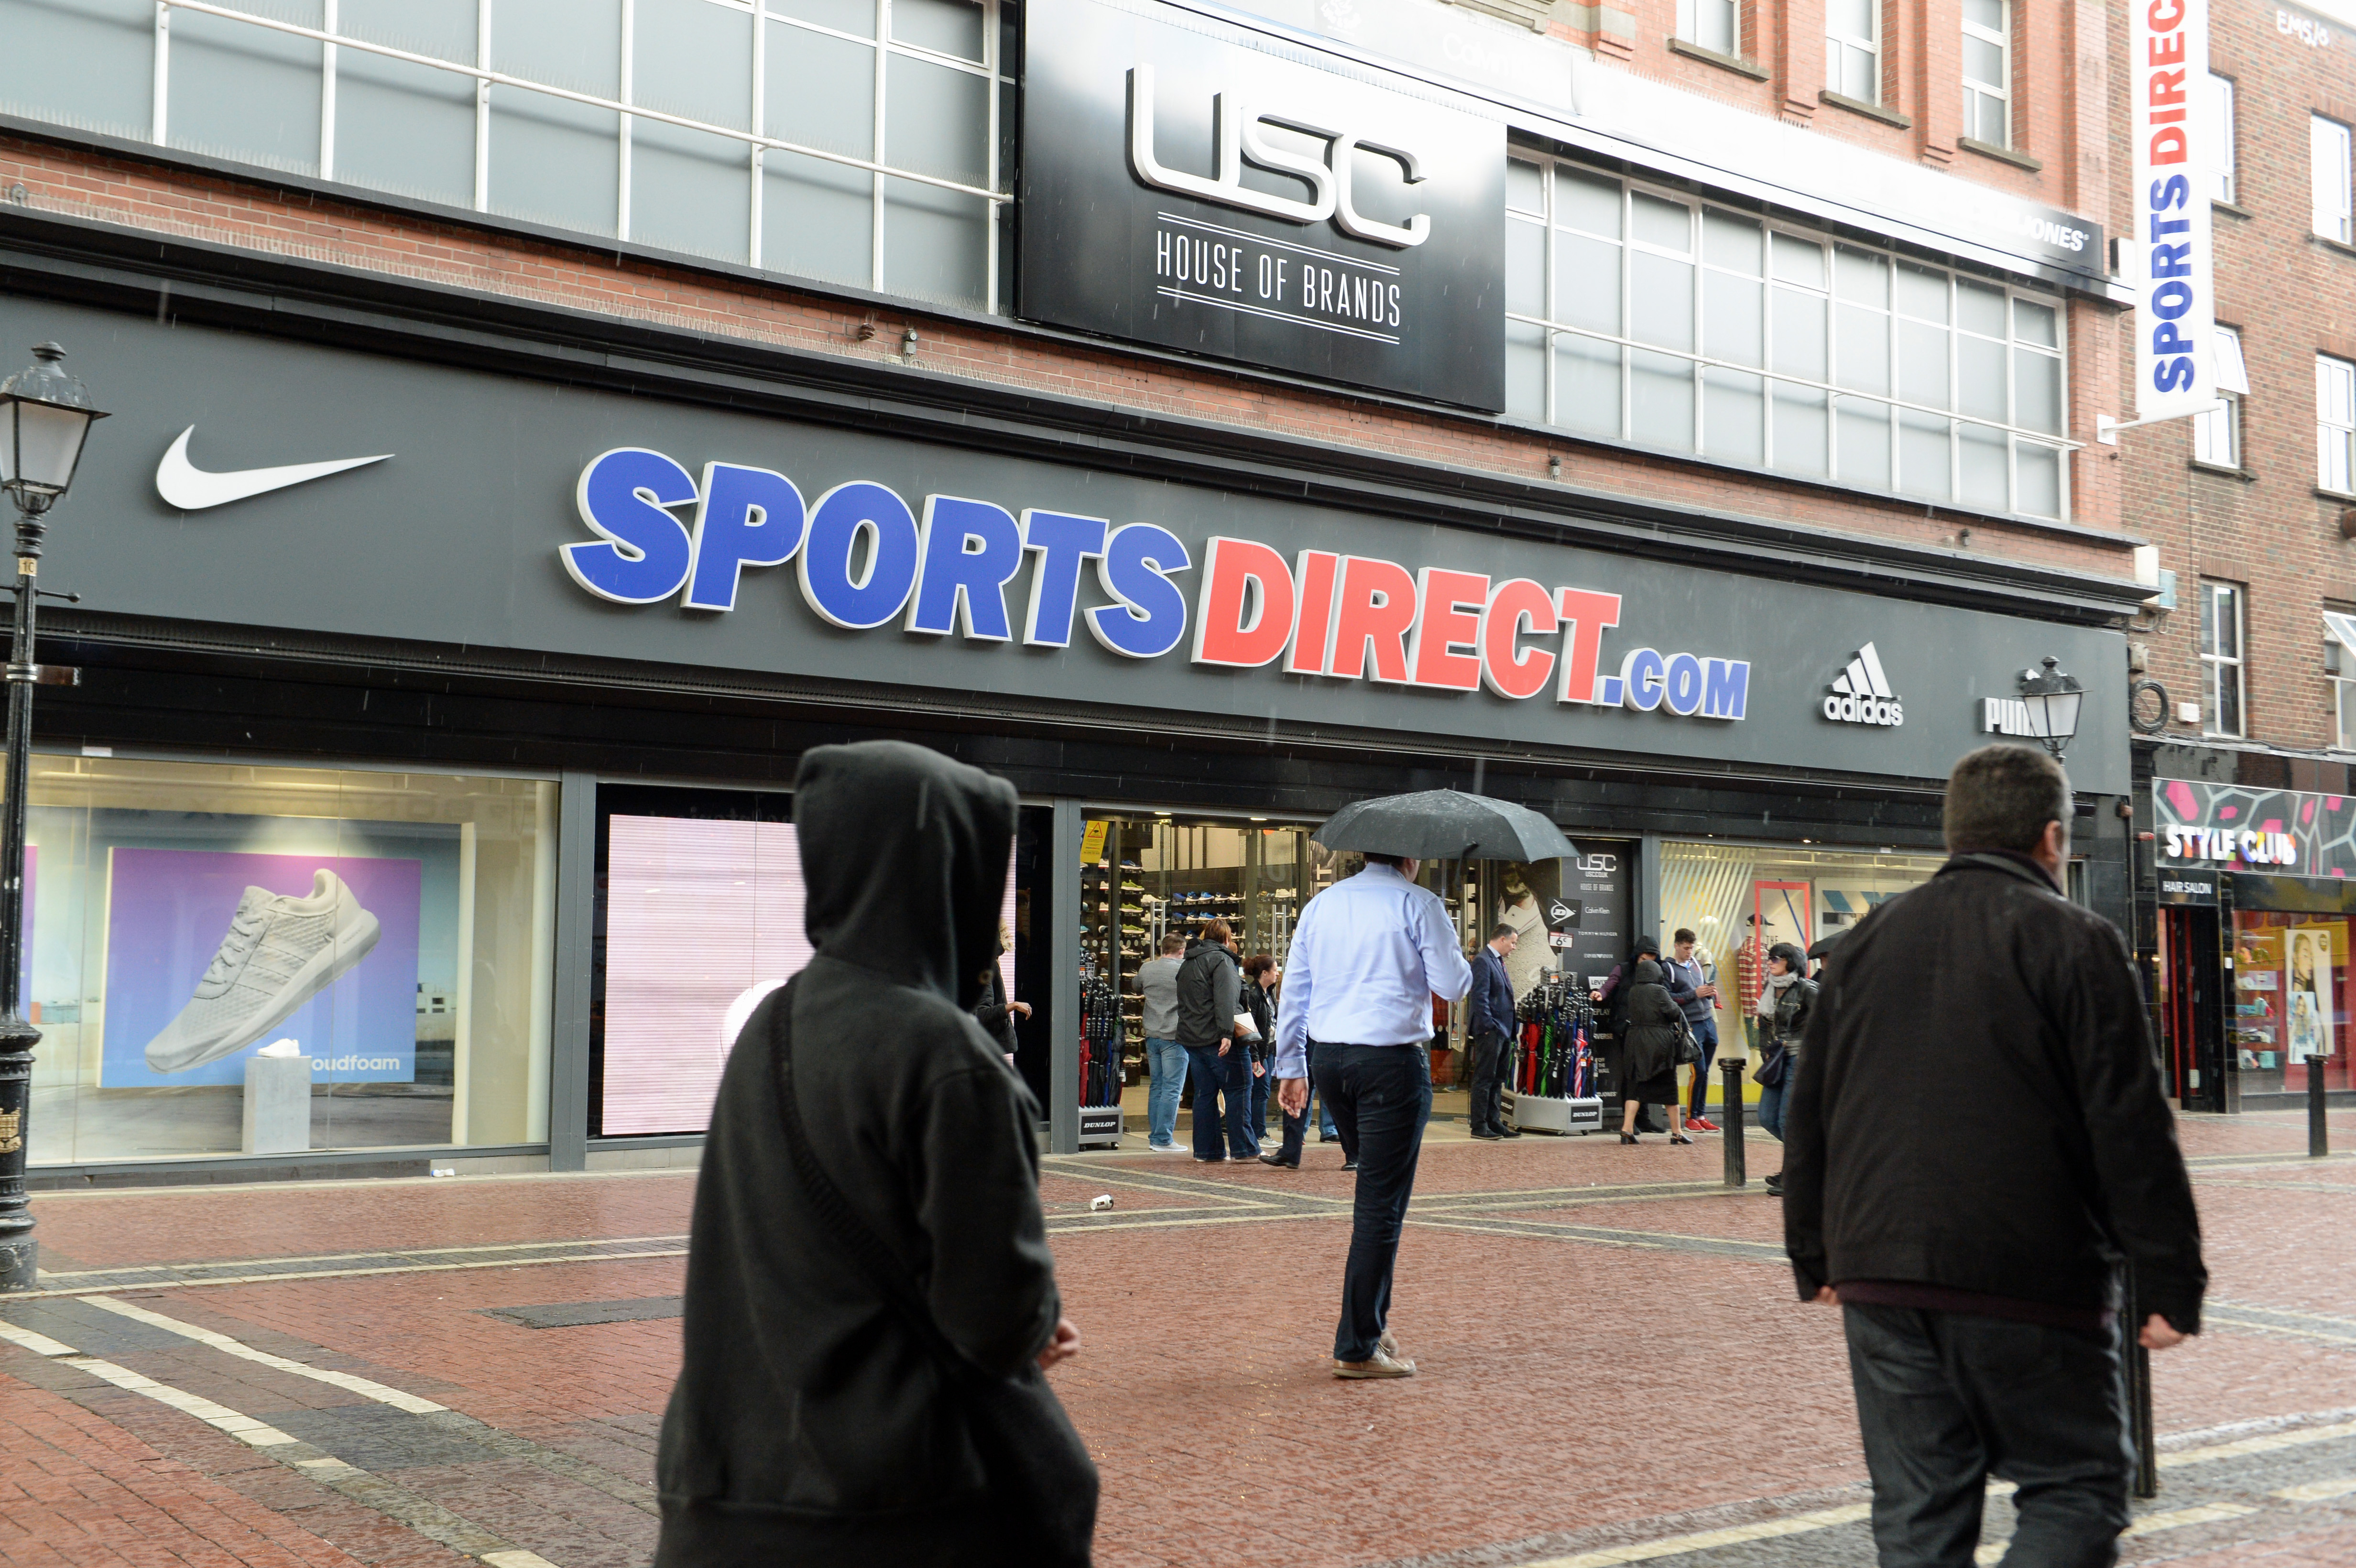 Grant Thornton to quit as Sports Direct auditor over €674m tax bill